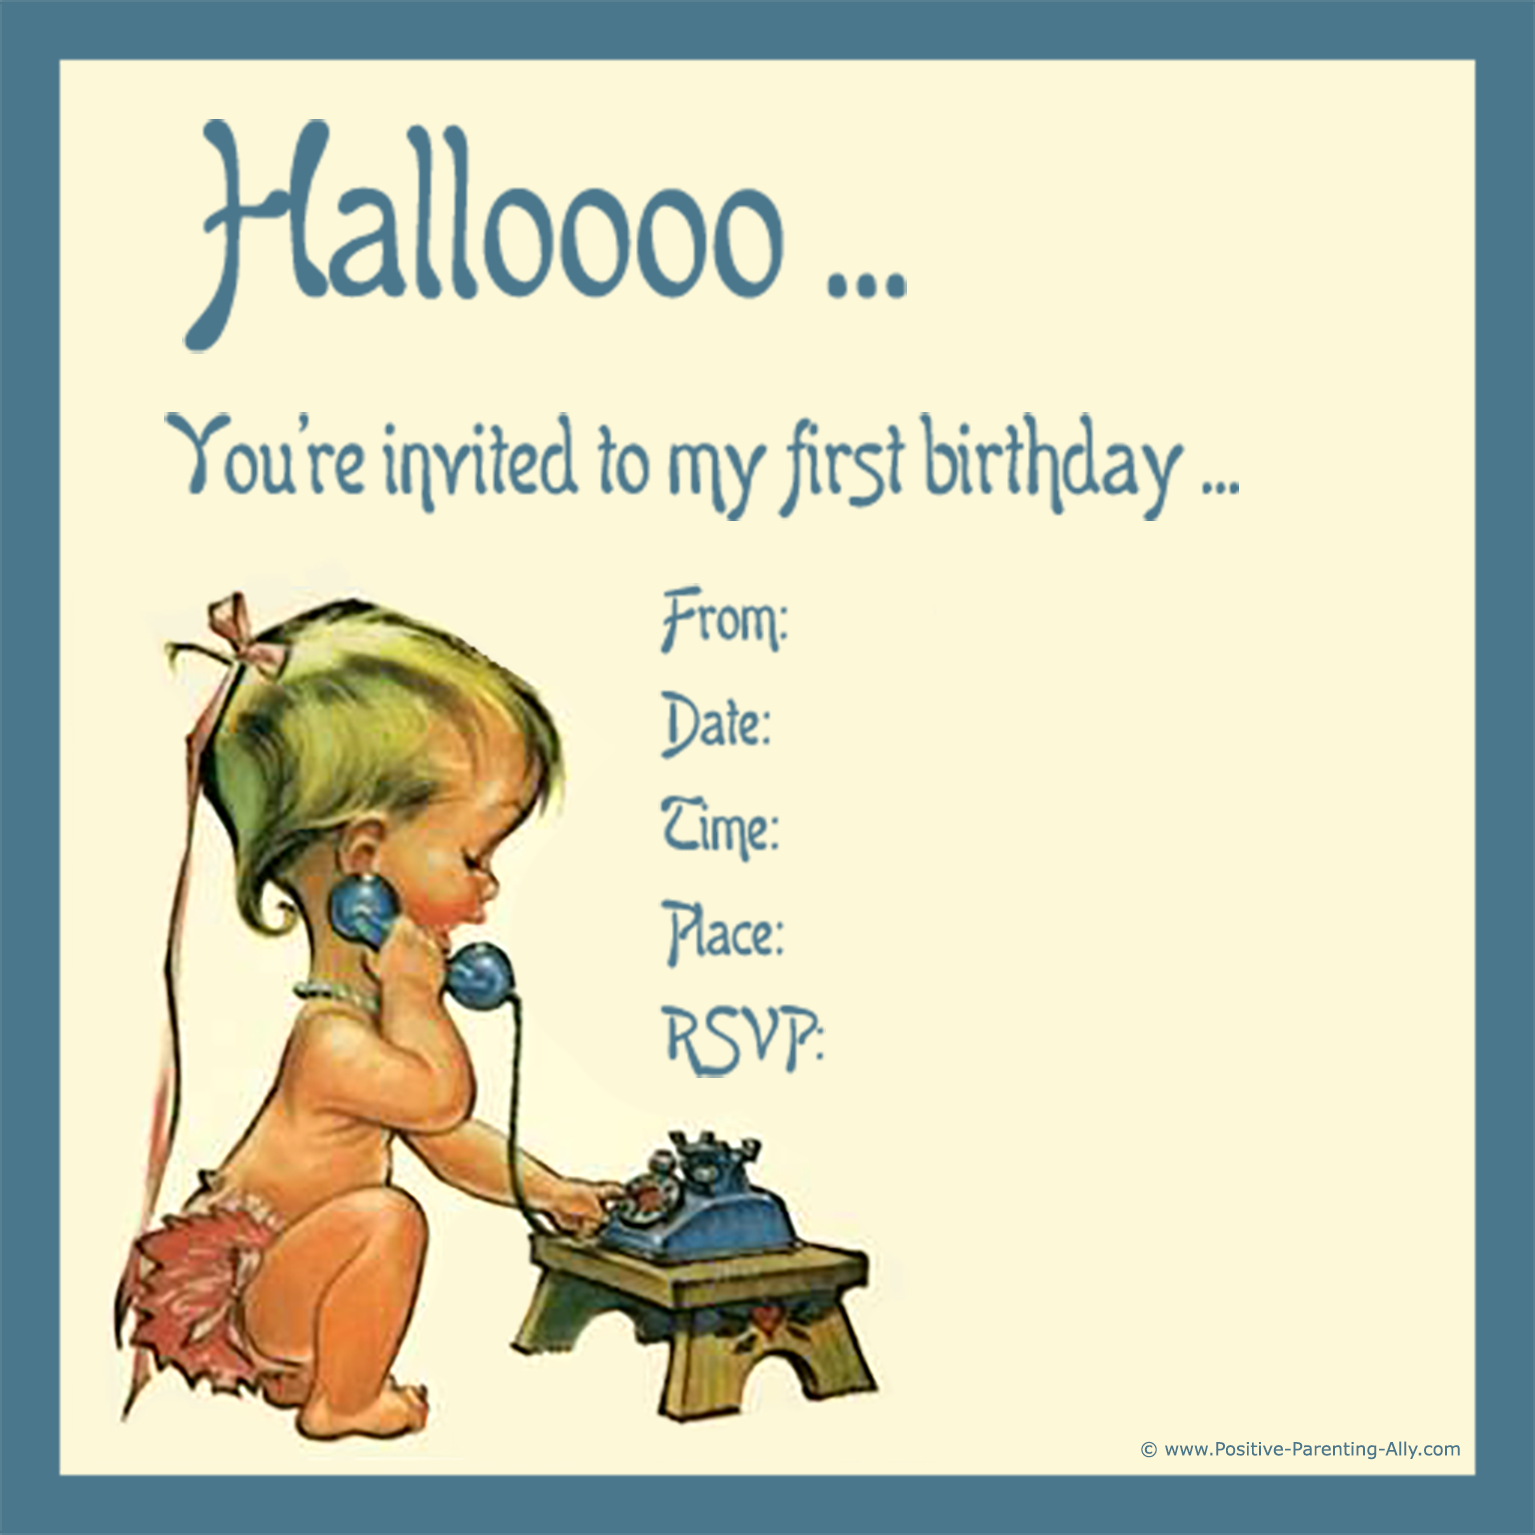 Old vintage 1st birthday invitation to print with the custest little baby on the phone.